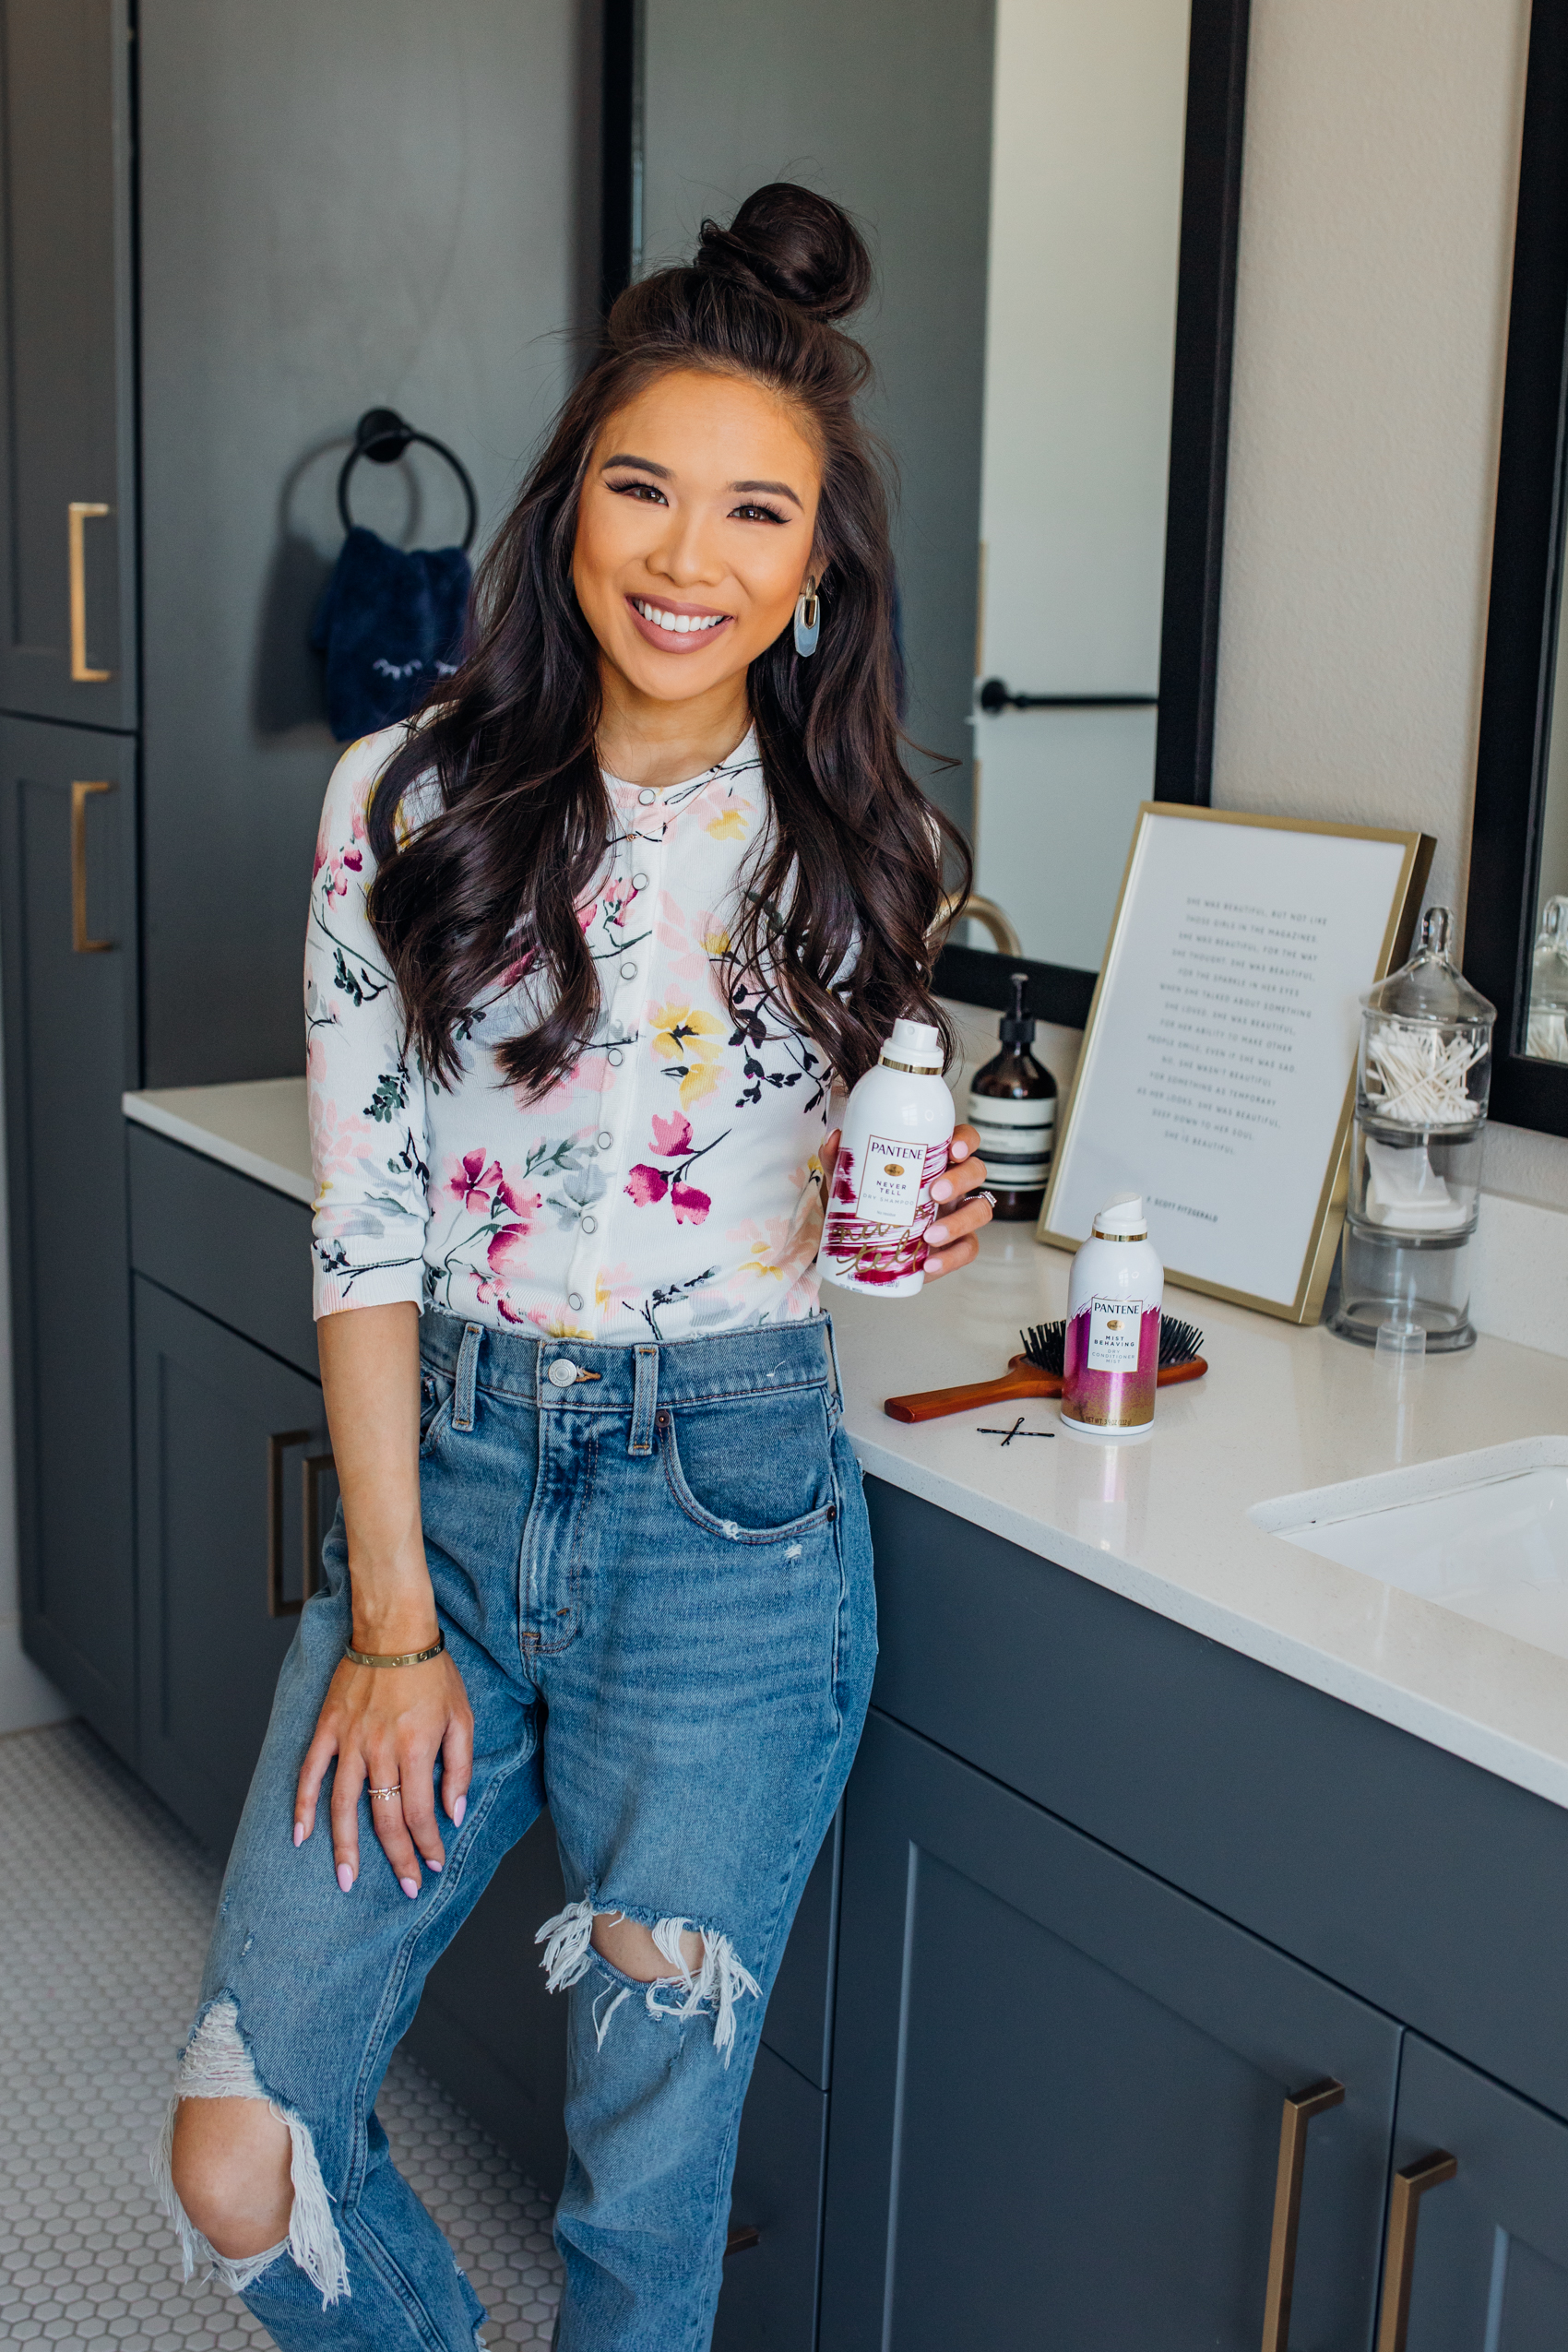 Blogger Hoang-Kim shares a hairstyle for not washing your hair and using dry shampoo